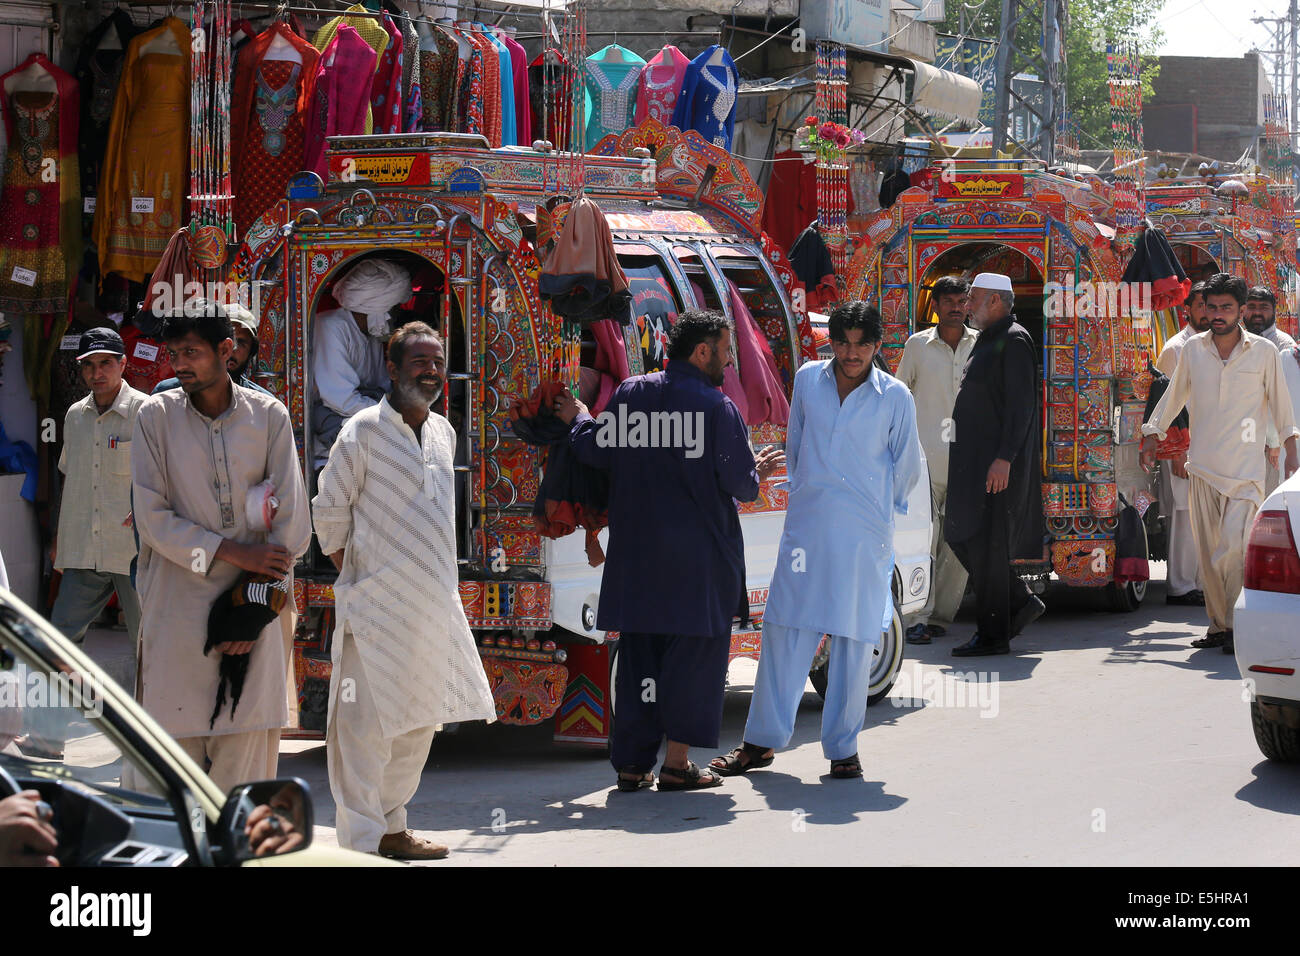 Colorful decorated mini busses, taxi cabs, public transport in Rawalpindi, Pakistan Stock Photo